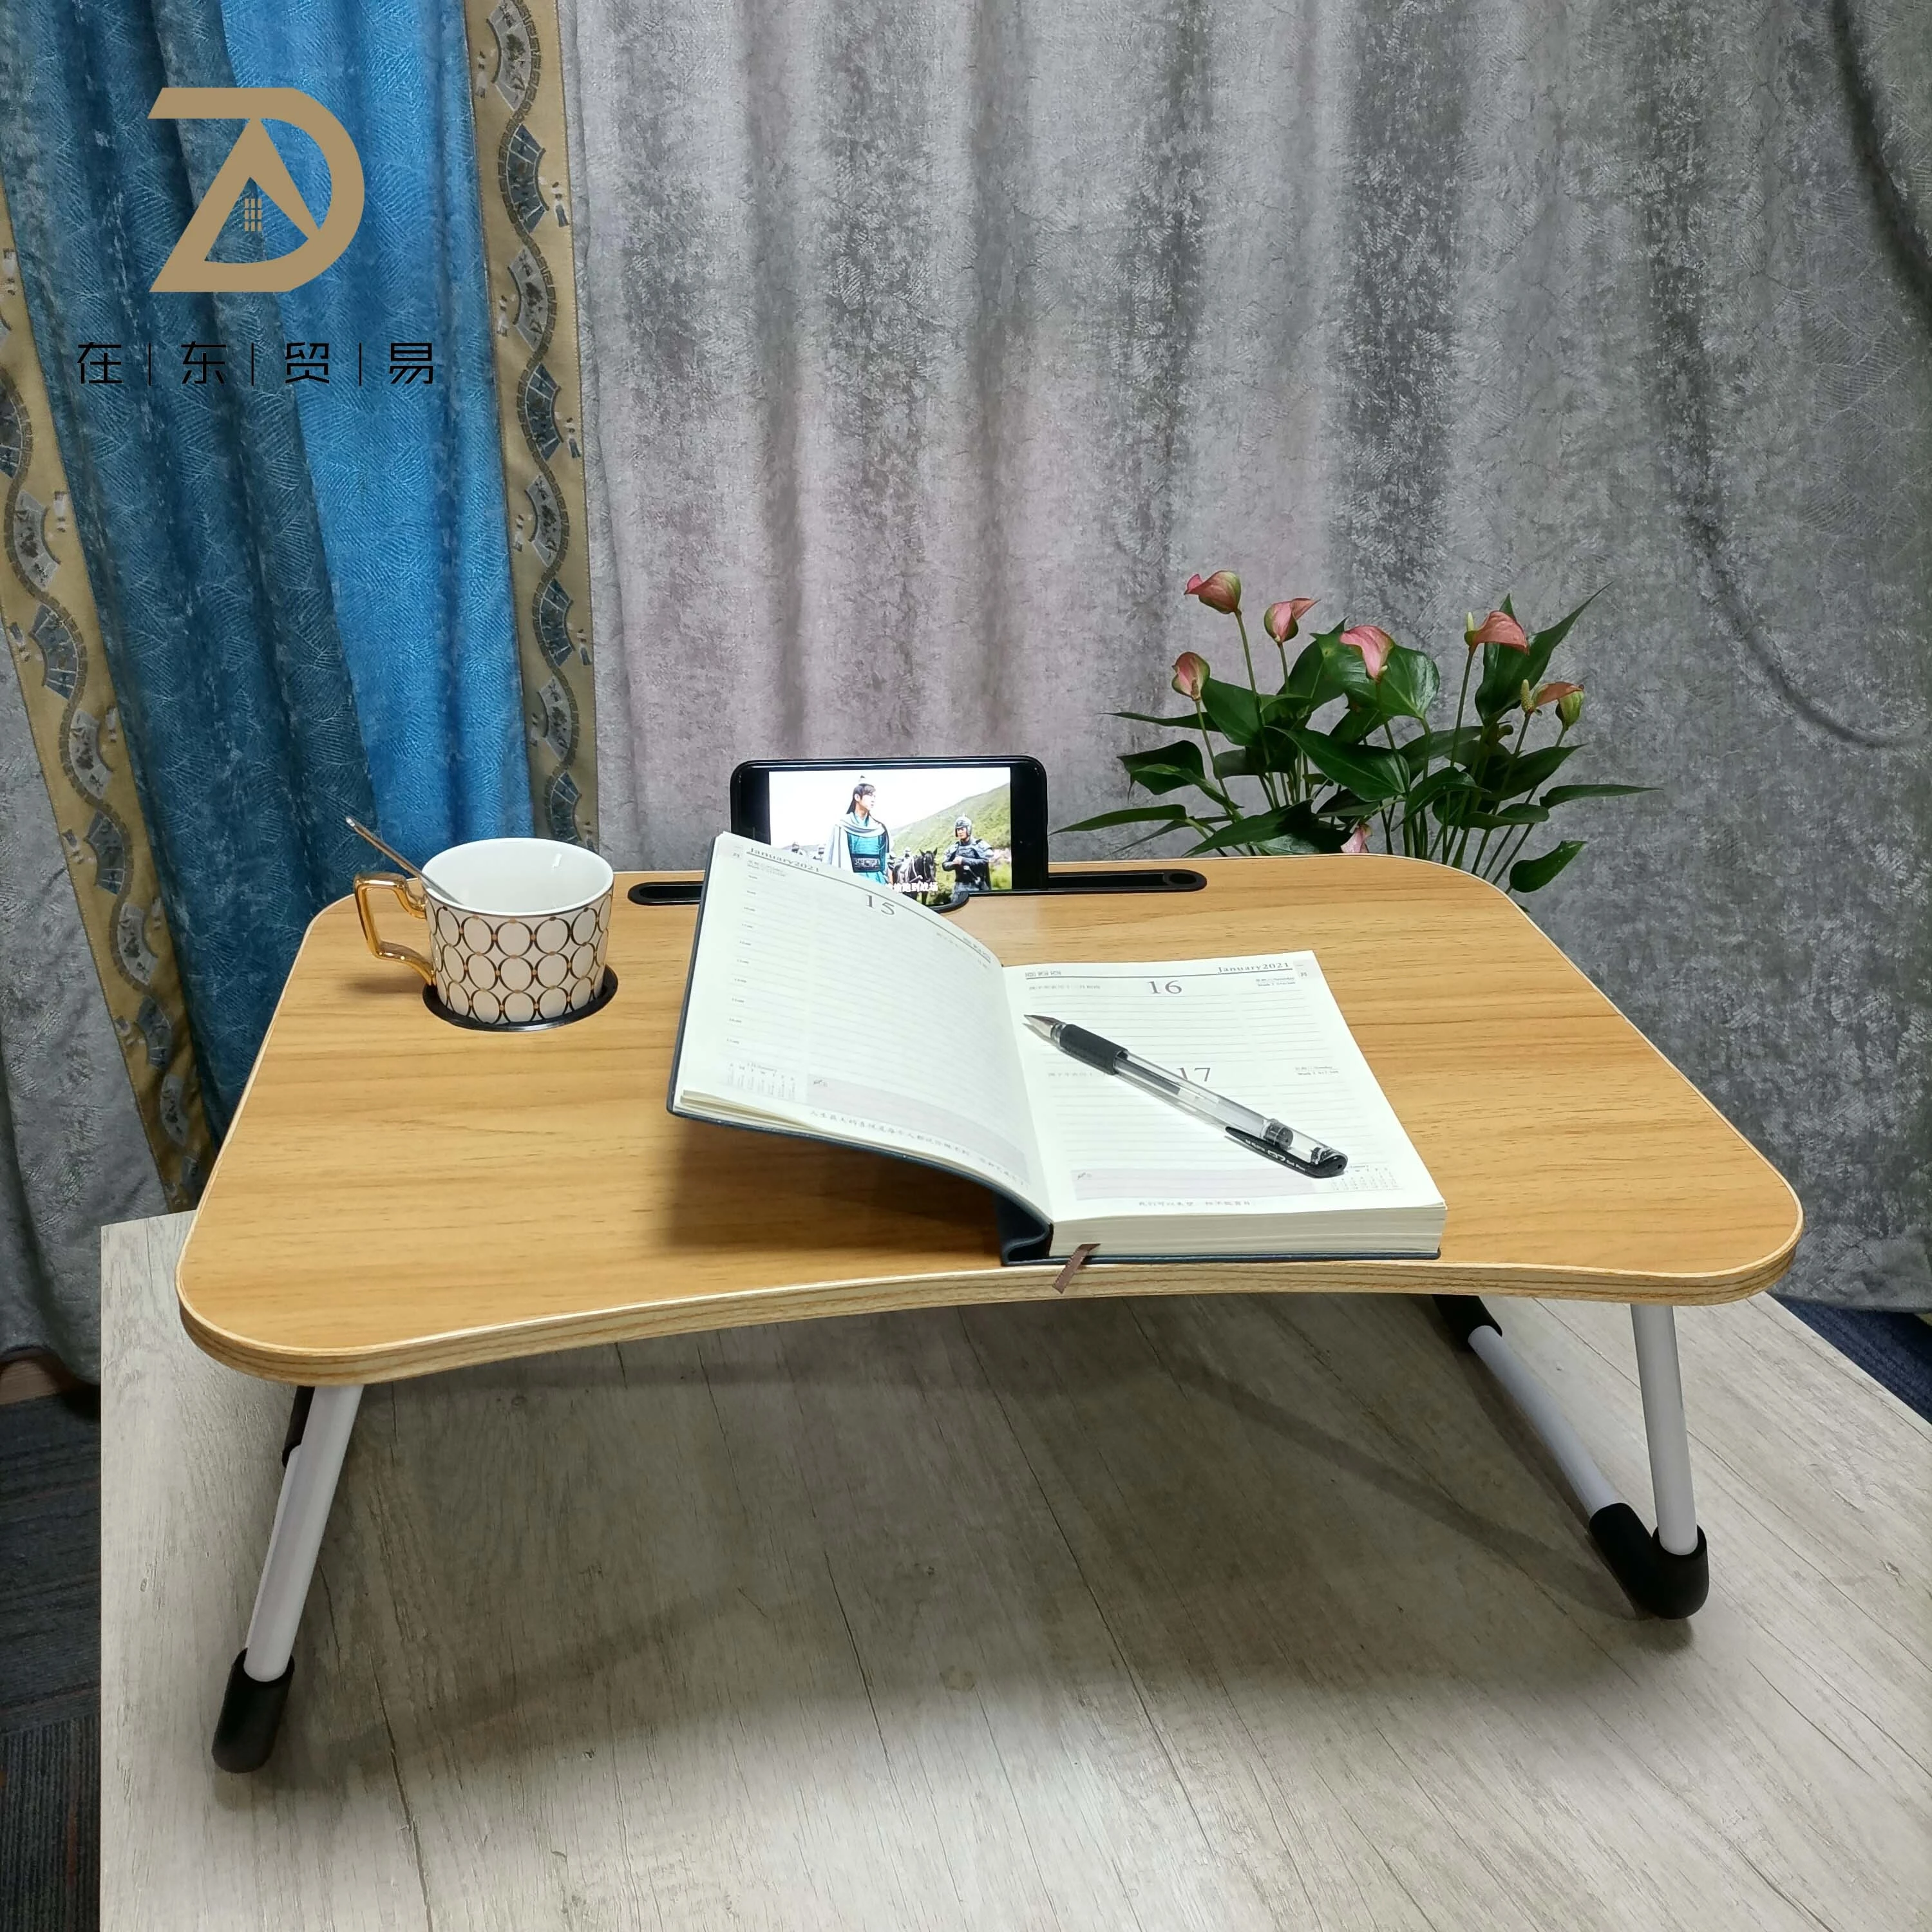 Cheap sale Portable mini  multifunctional laptop desk table wooden laptop table for bed